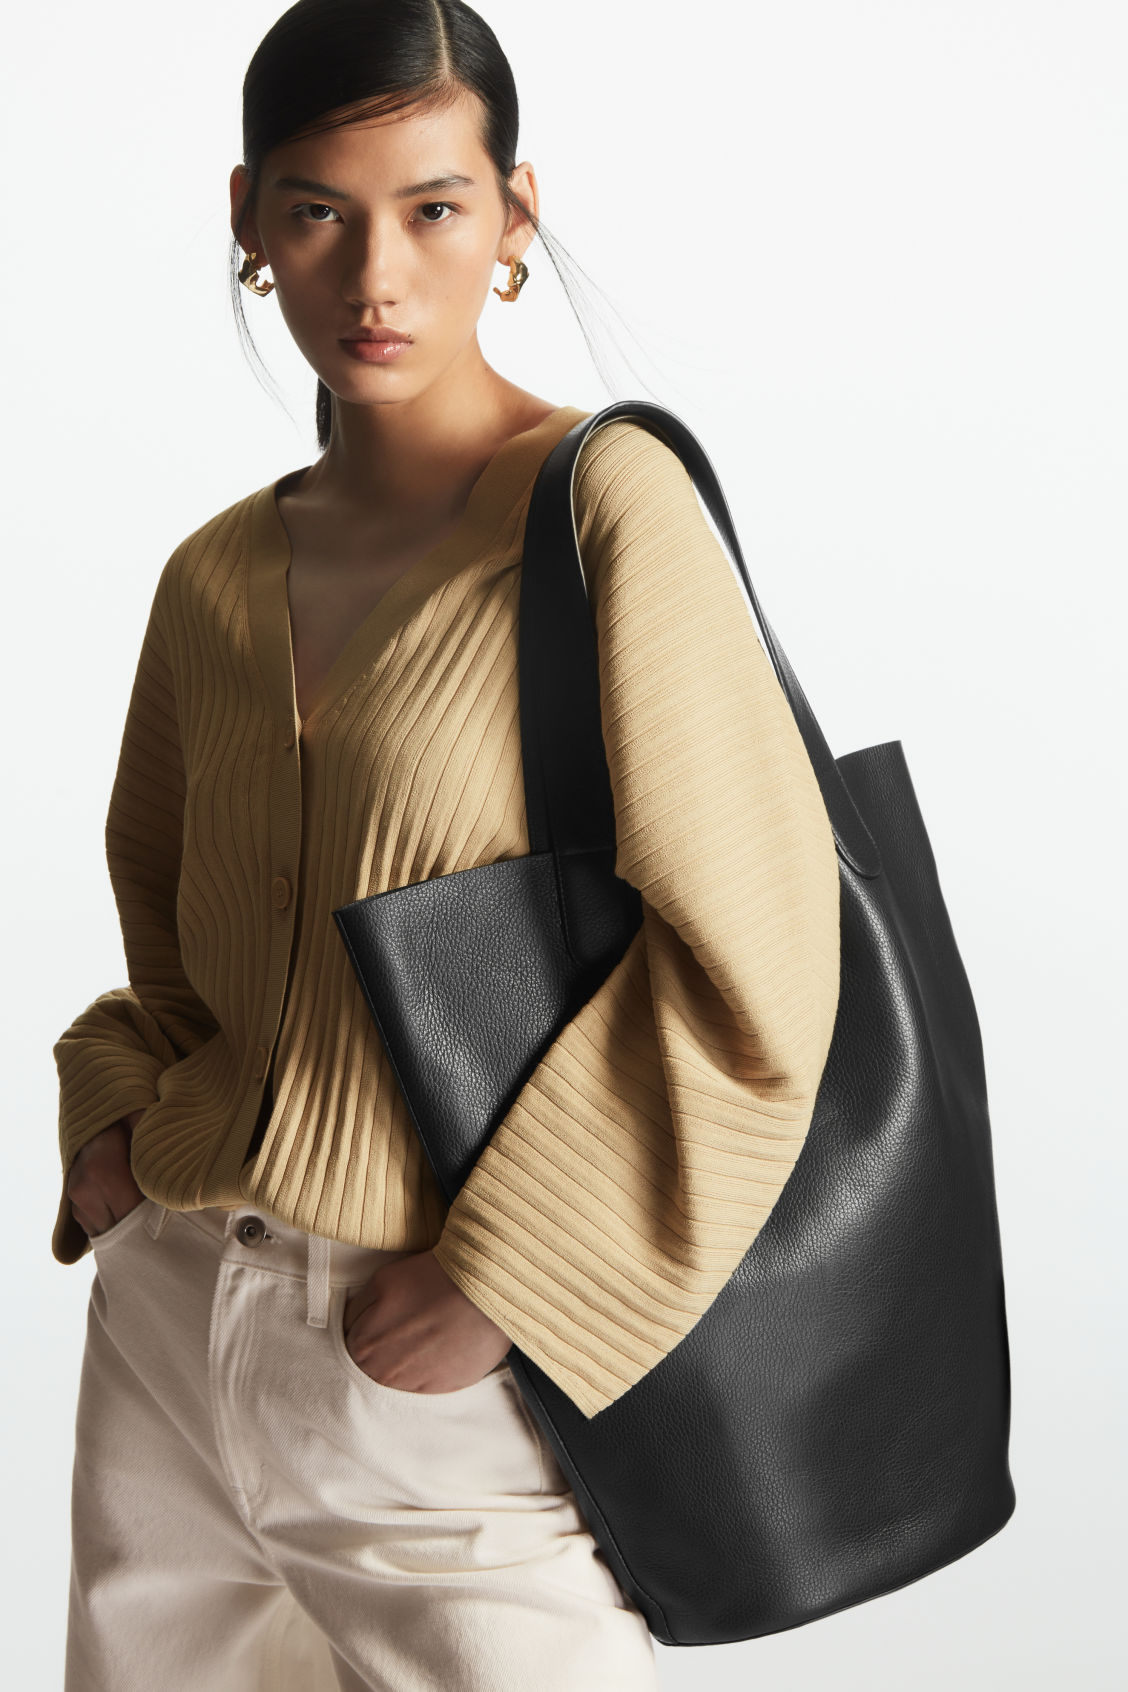 COS Crescent Bag - Leather in Black